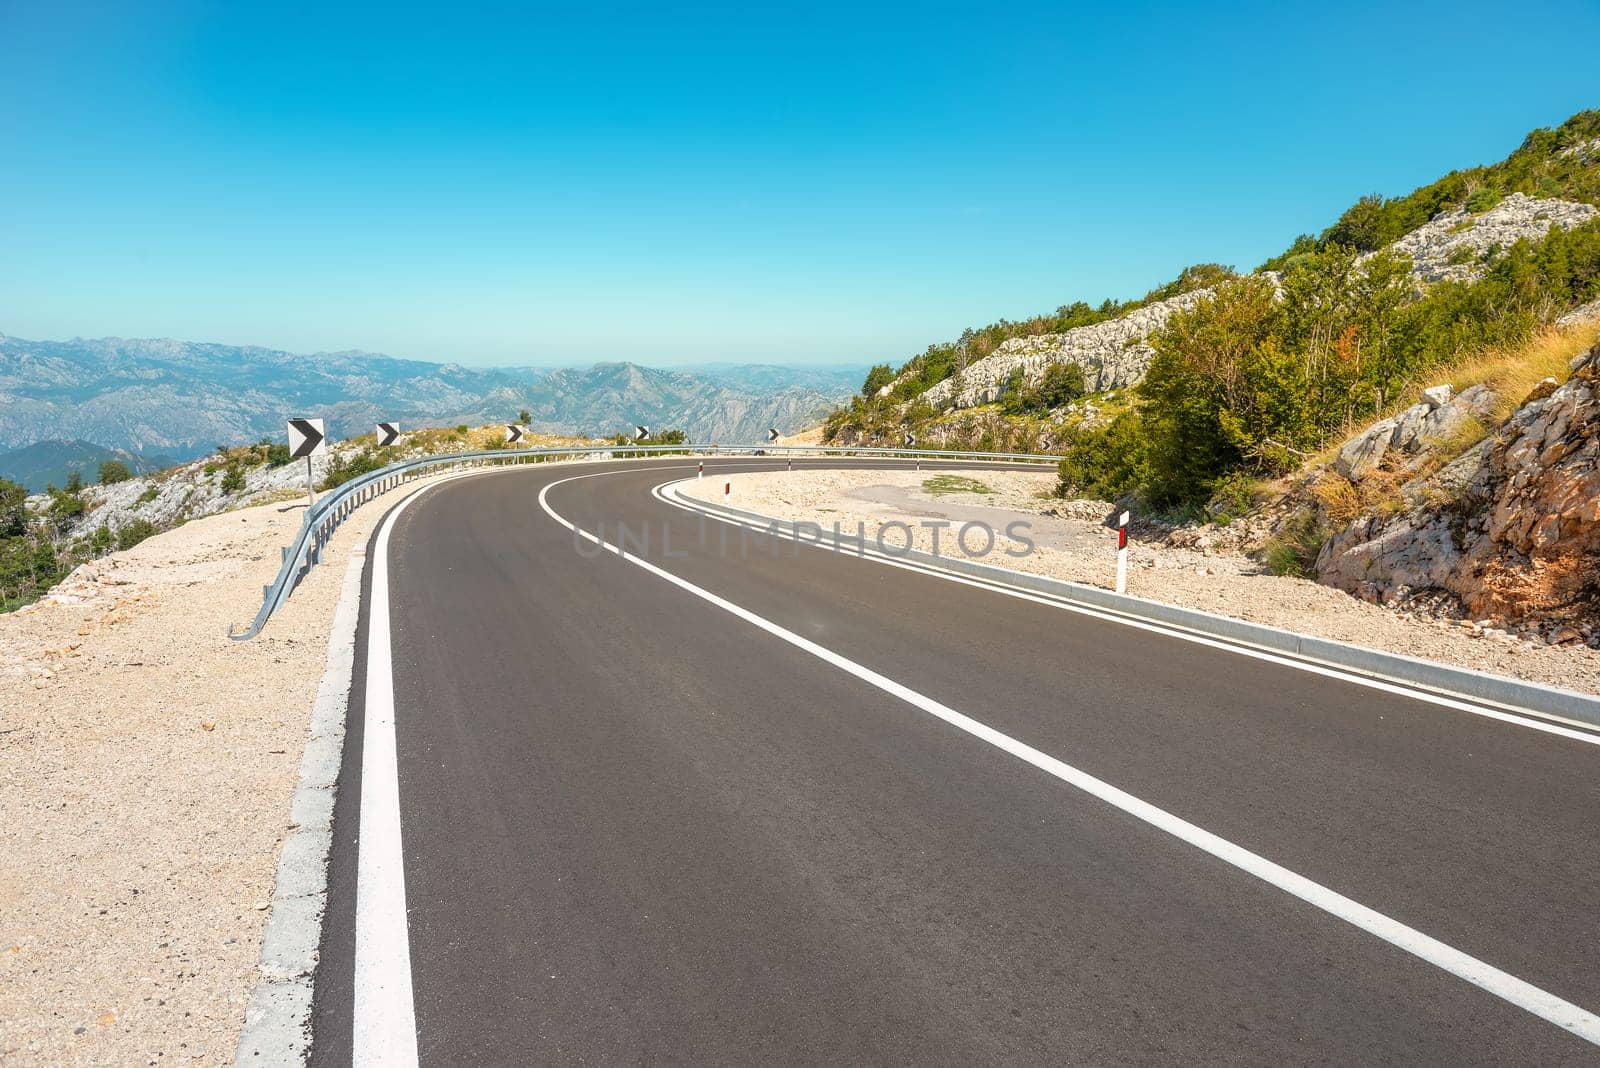 Landscape with the image of mountain road in Montenegro